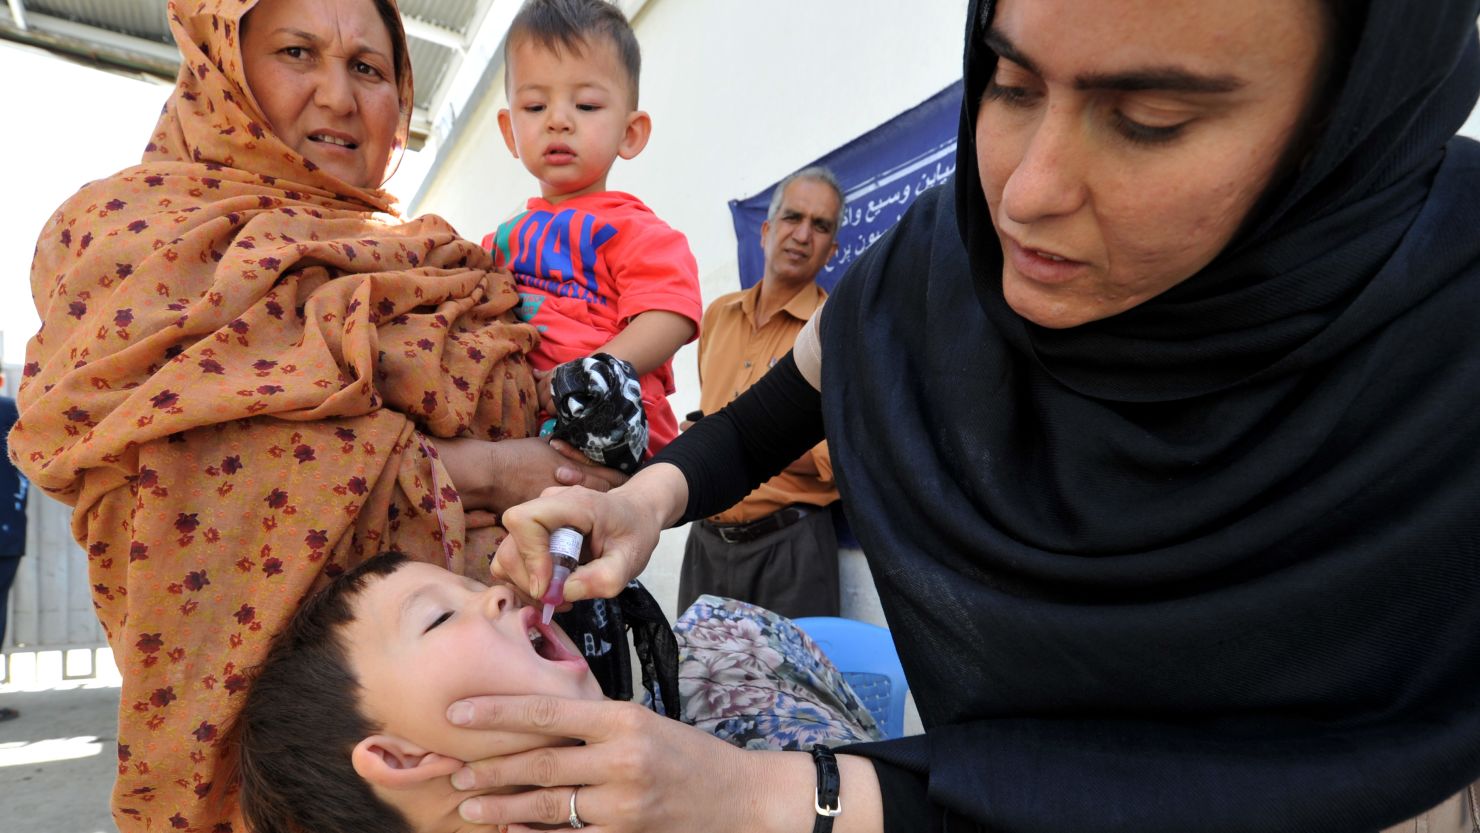 Afghan President Hamid Karzai says polio remains a problem in both Afghanistan and neighboring Pakistan.